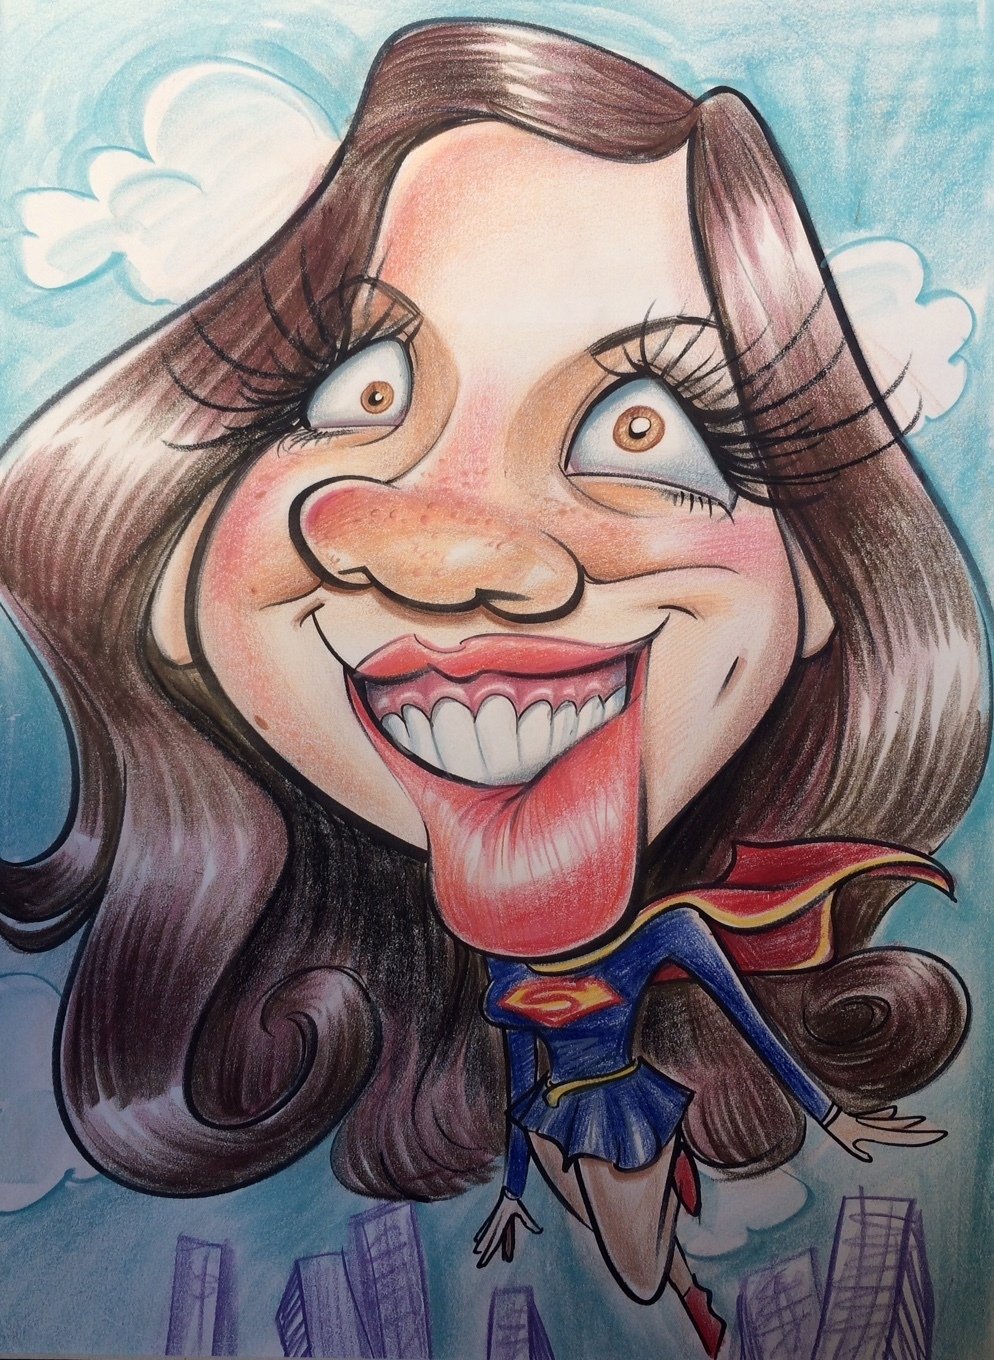 NYS Fair: 3 caricature artists doodle dramatically different takes on 1